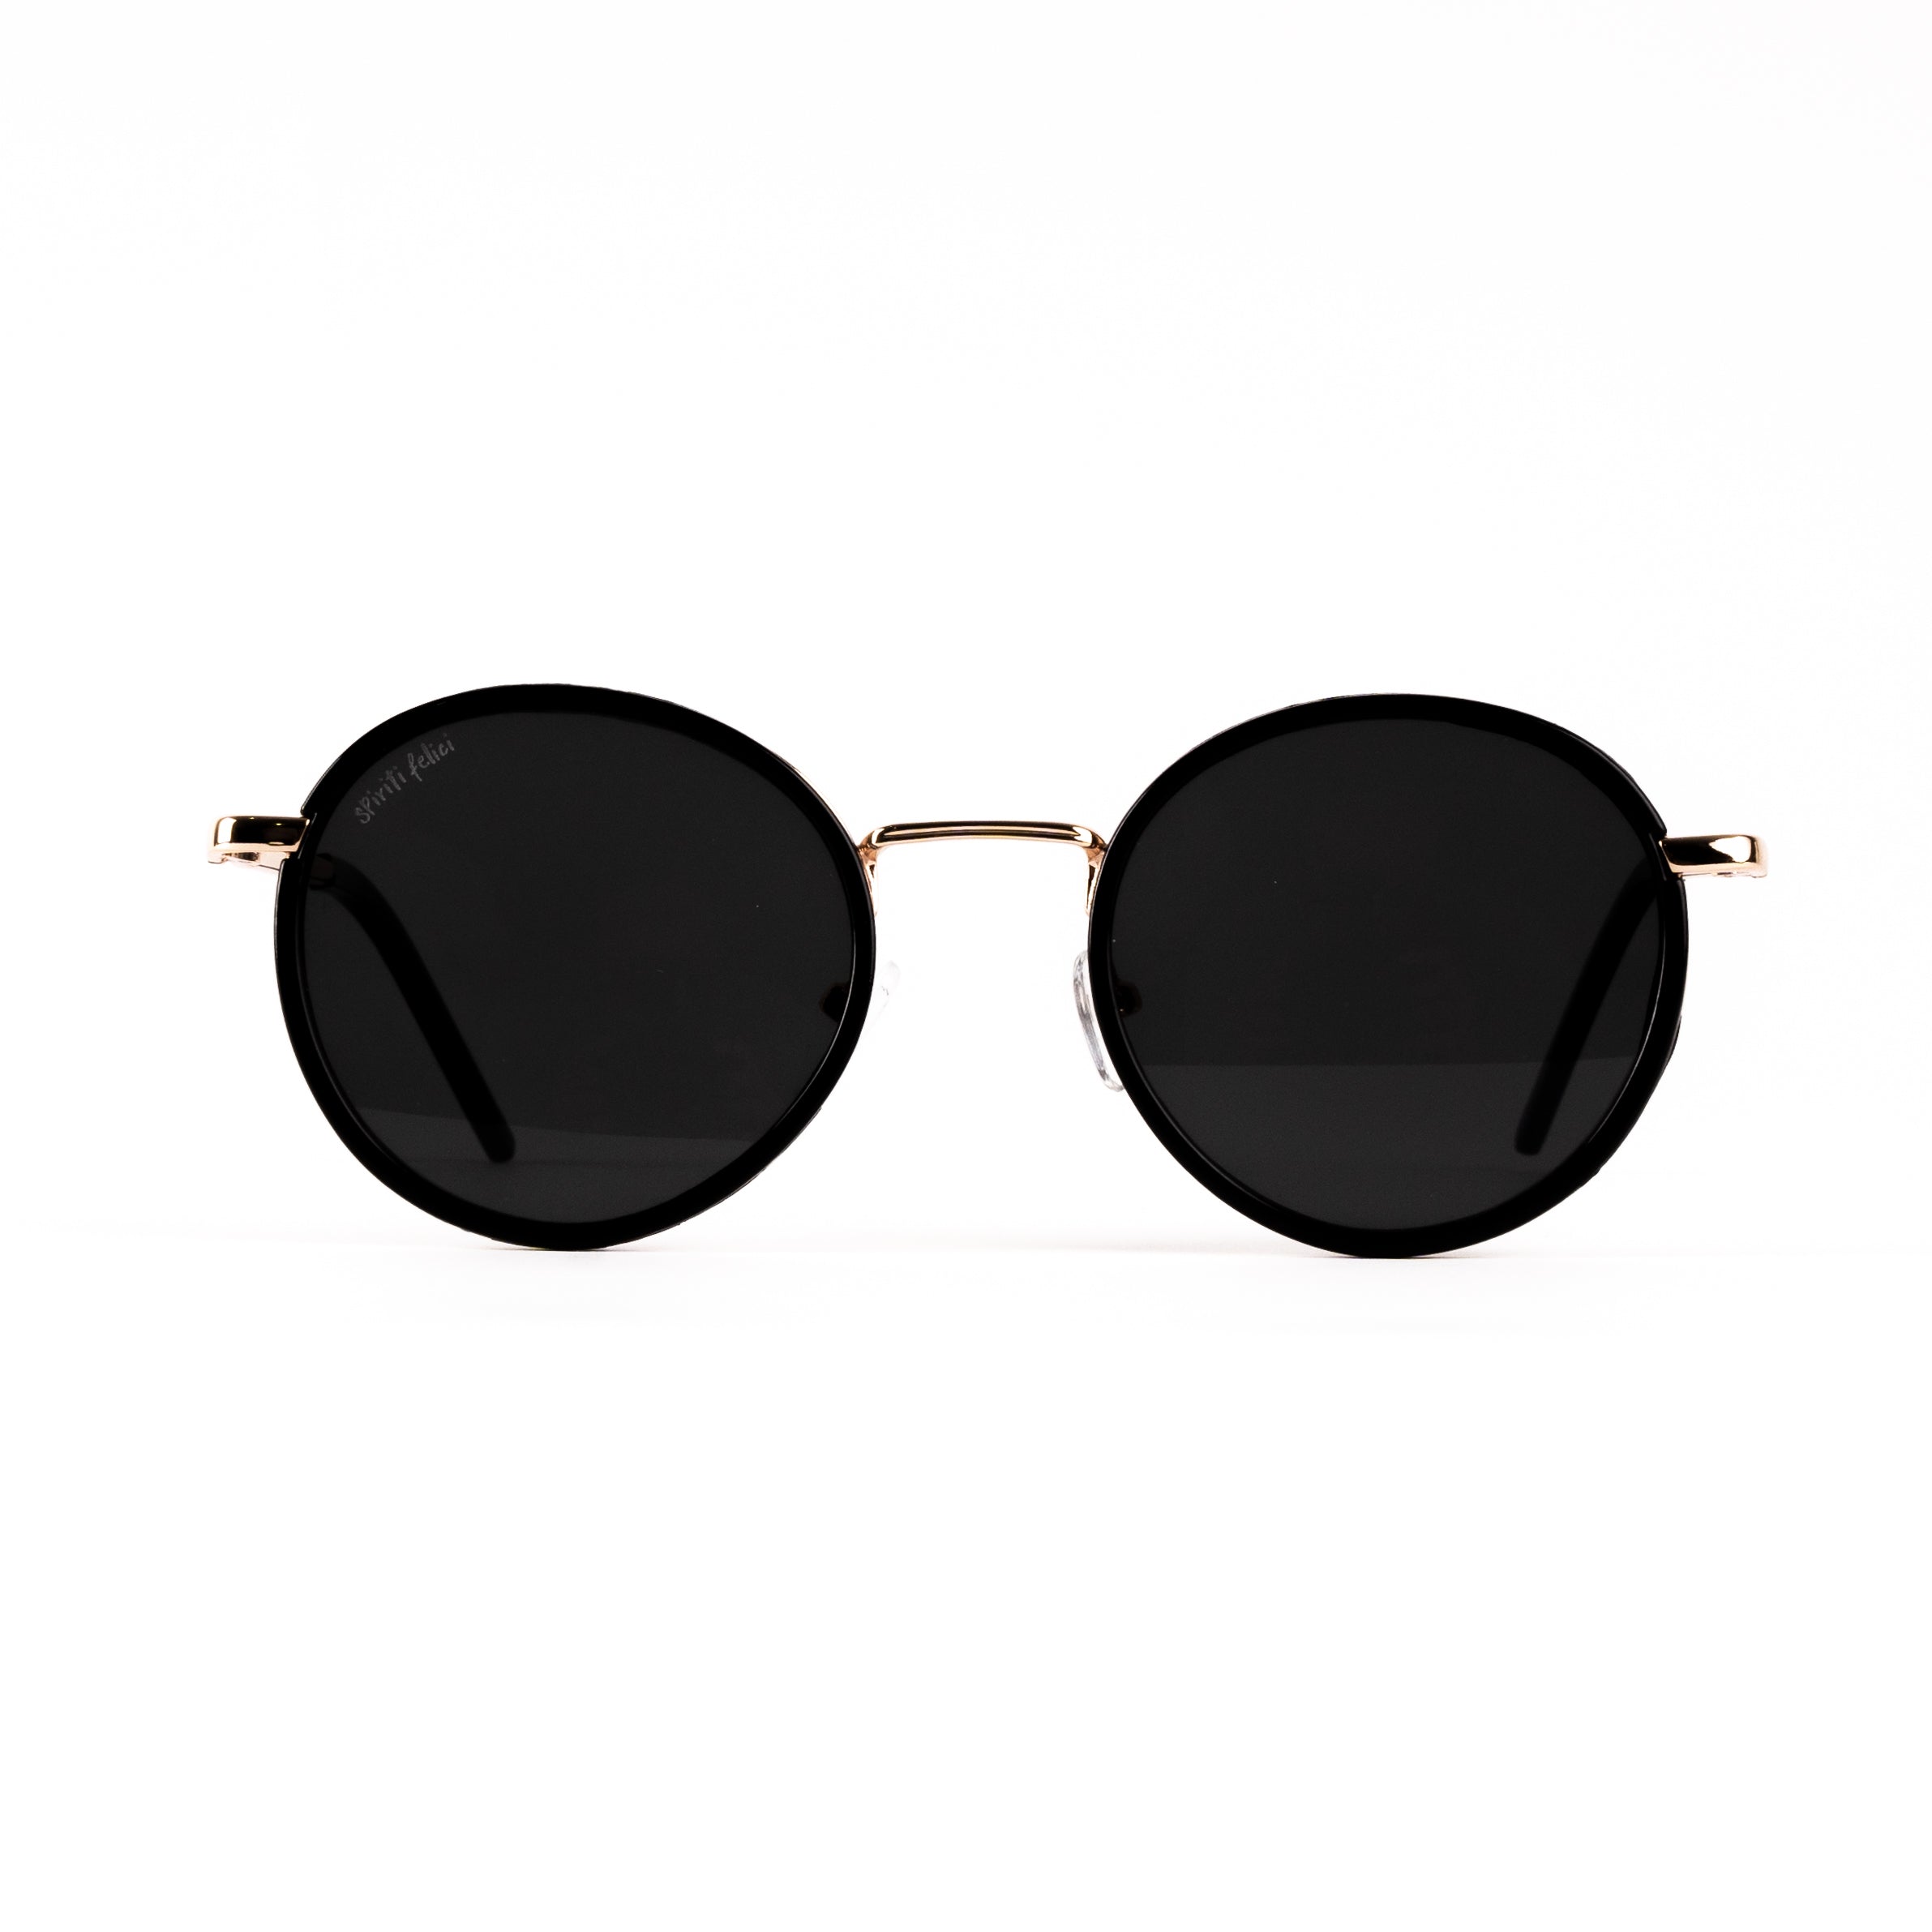 Buy ROUND ABOUT sunglasses from Spiriti Felici available online at VEND. Explore more product category collections now